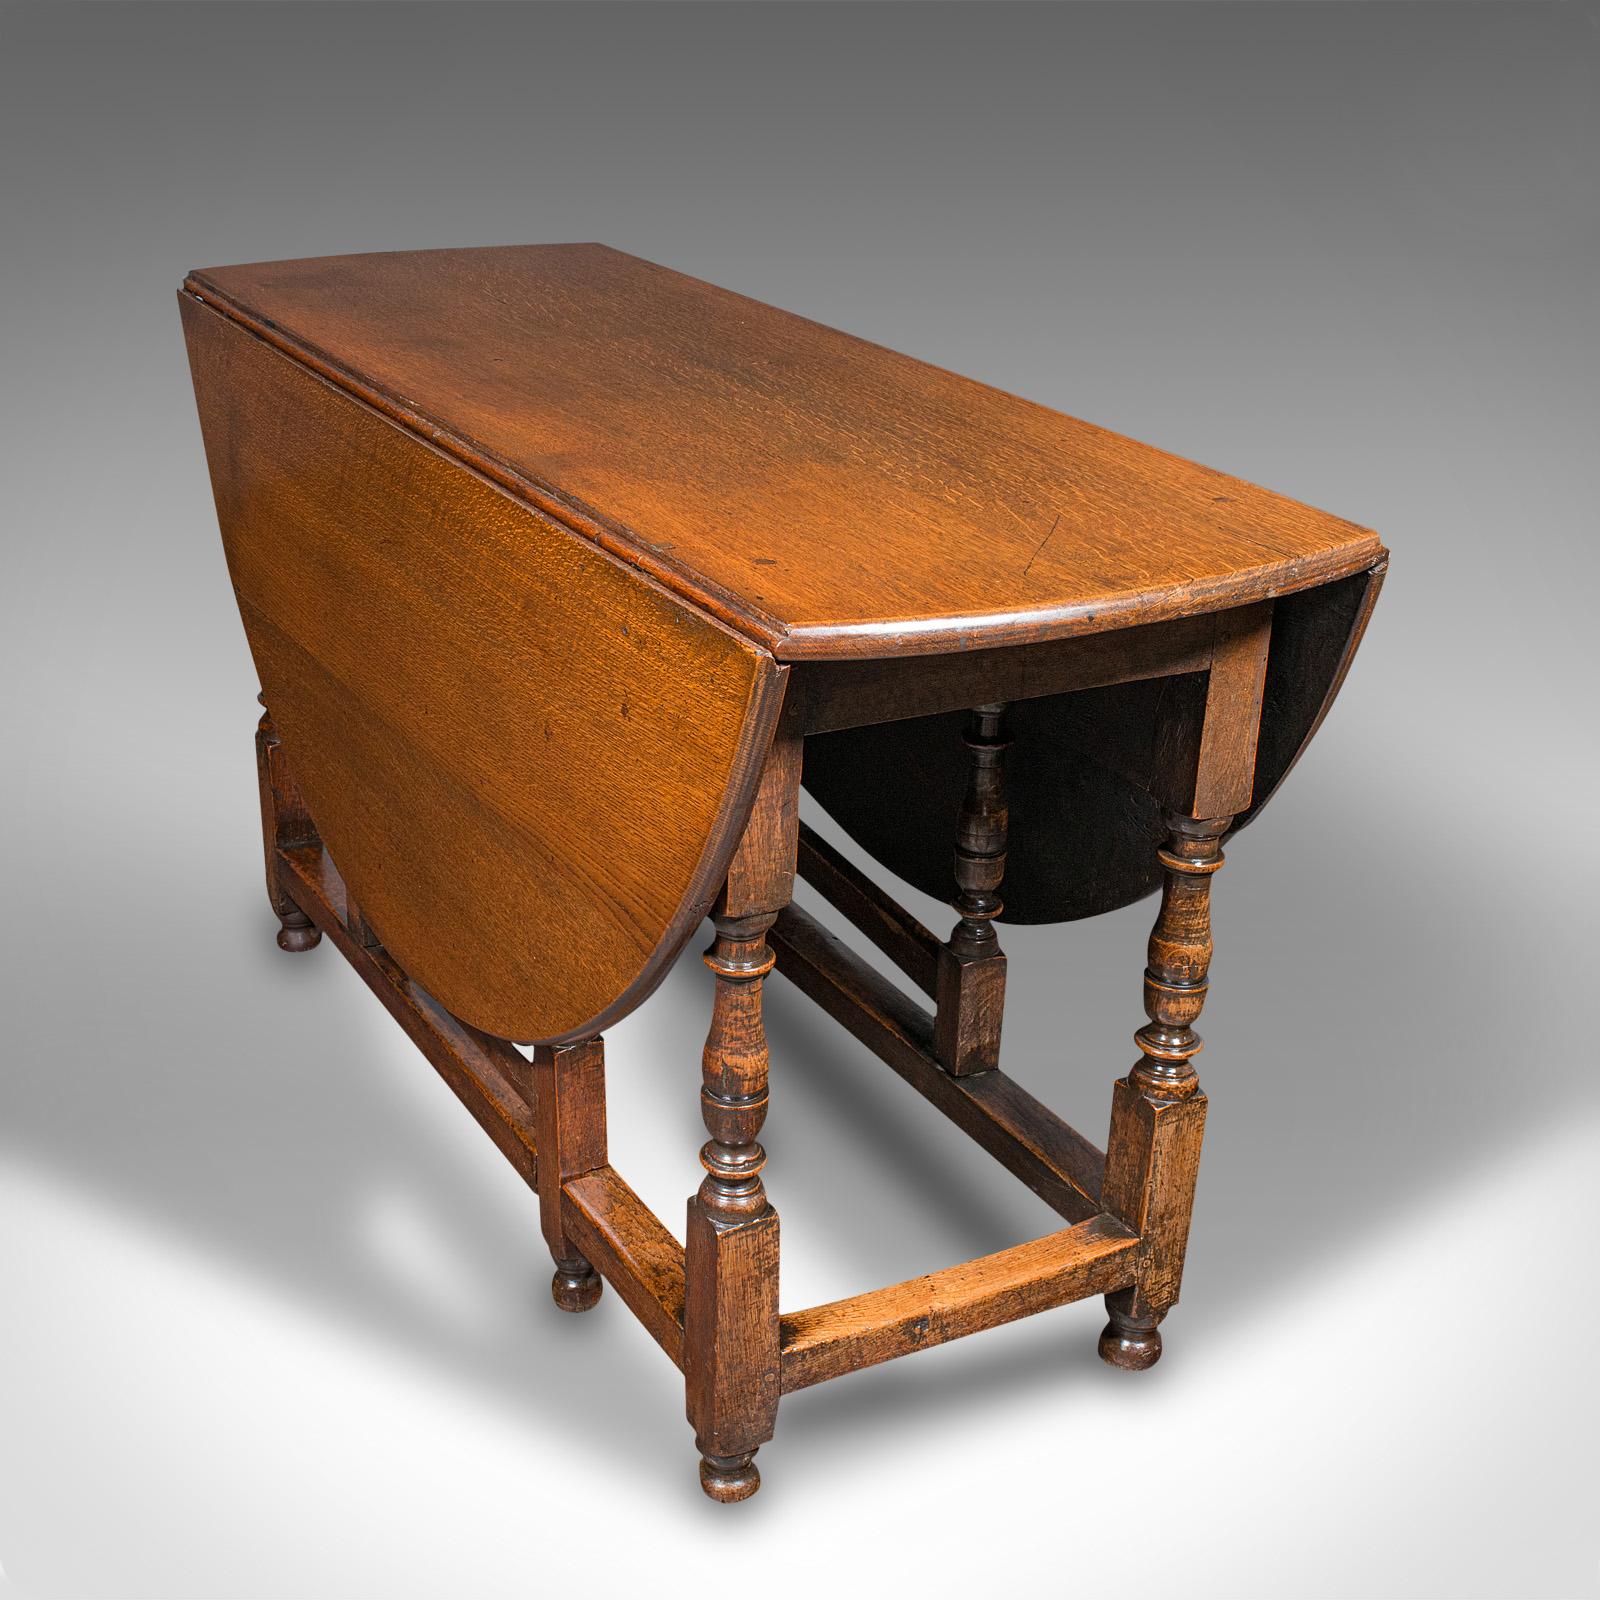 This is an antique 4-6 seat gate leg table. An English, oak oval extending farmhouse table, dating to the early Georgian period, circa 1750.

Of superb classic farmhouse appeal and beautifully figured
Displays a desirable aged patina and in good